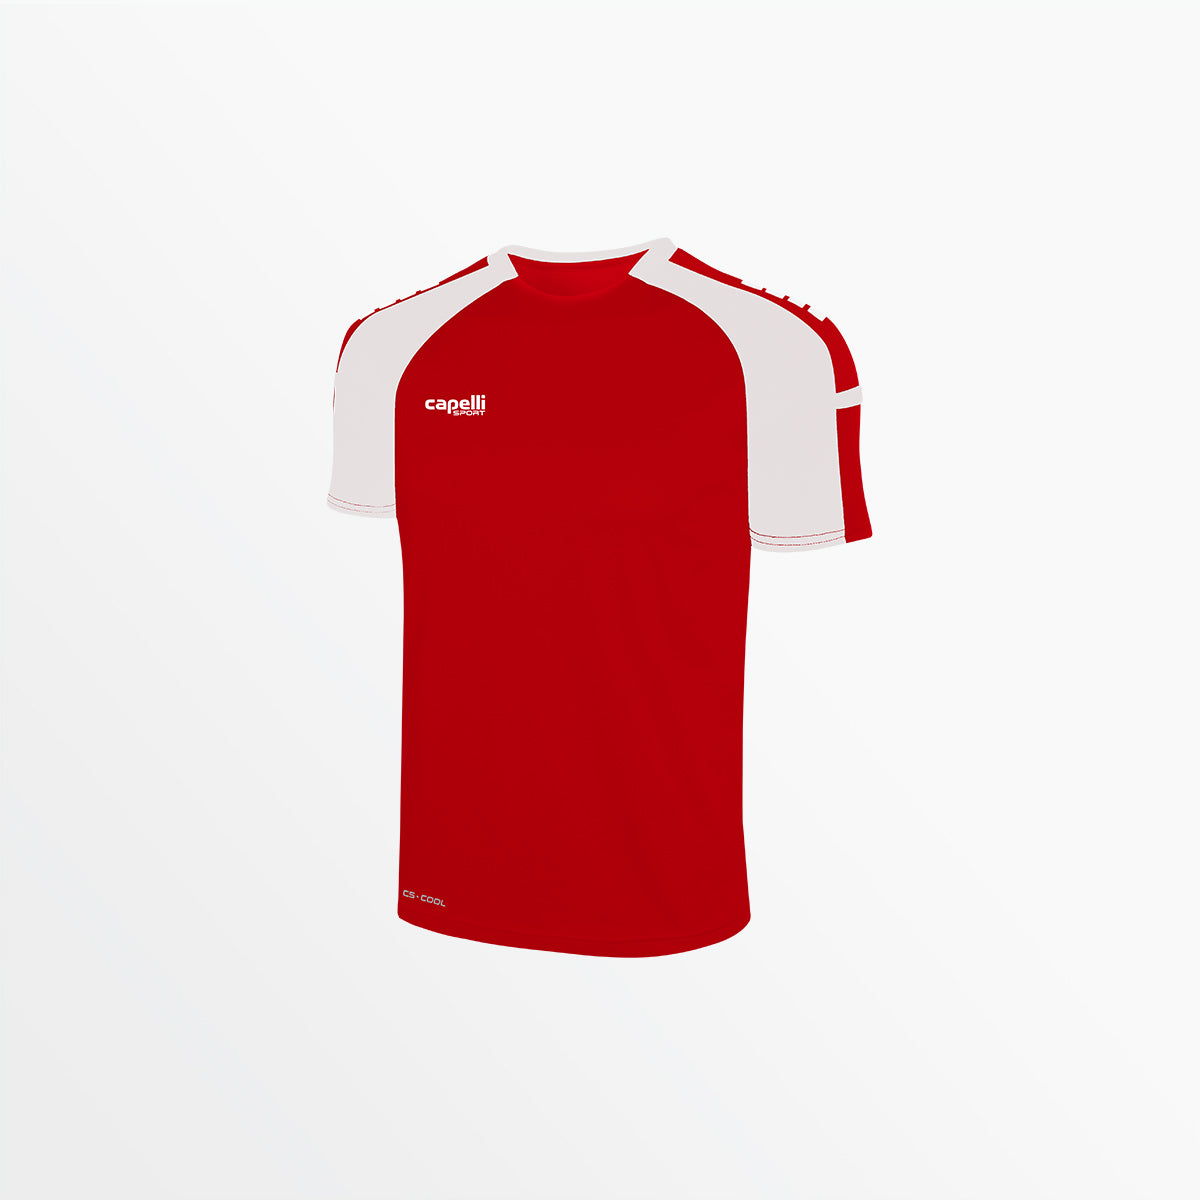 YOUTH PITCH II JERSEY